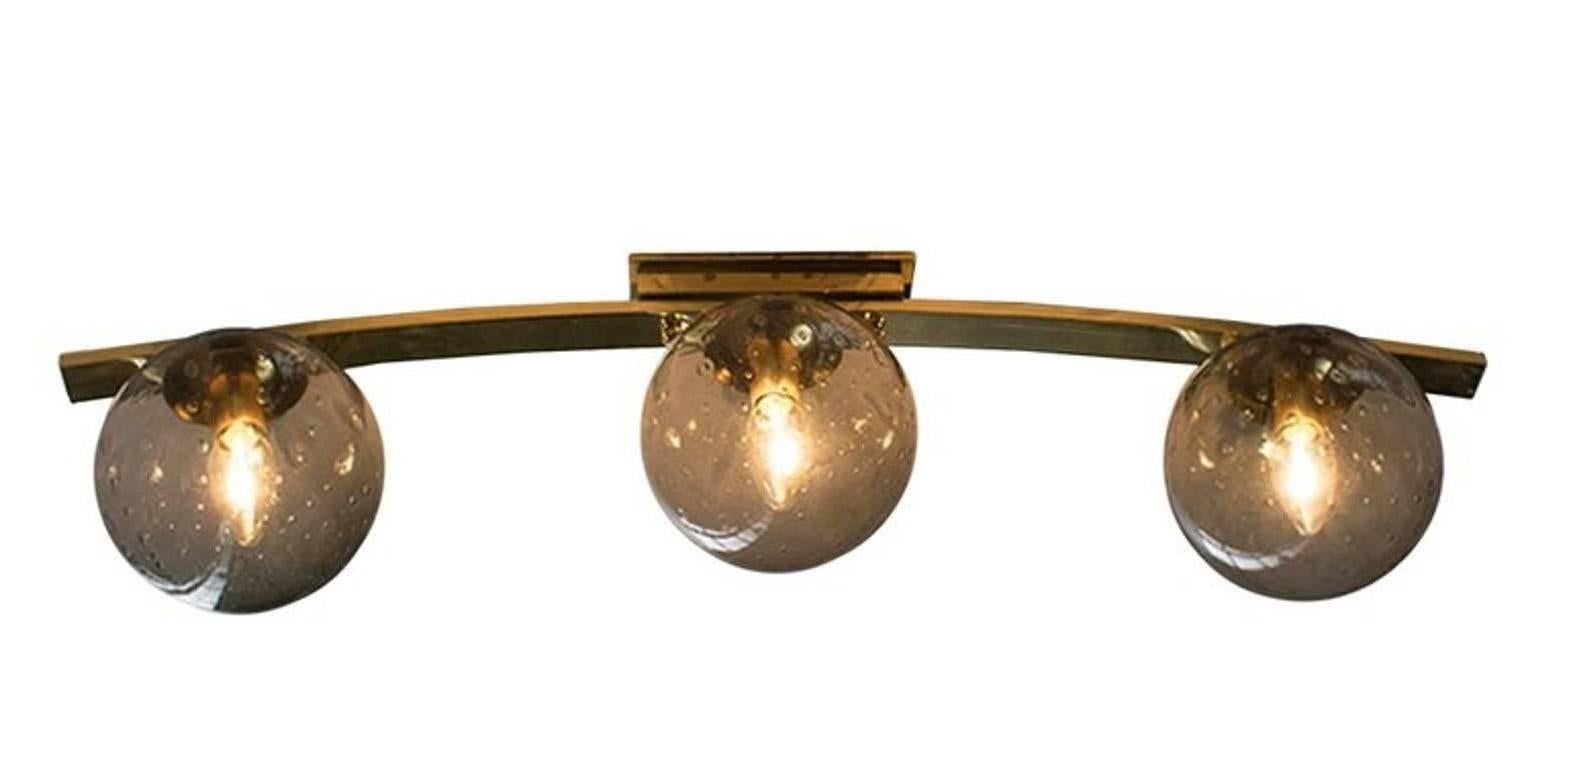 Italian modern wall light or flush mount with smoky Murano glass globes carefully hand blown with bubbles inside the glass using Bollicine technique, mounted on curved polished finish brass metal frame / Designed by Fabio Bergomi / Made in Italy
3